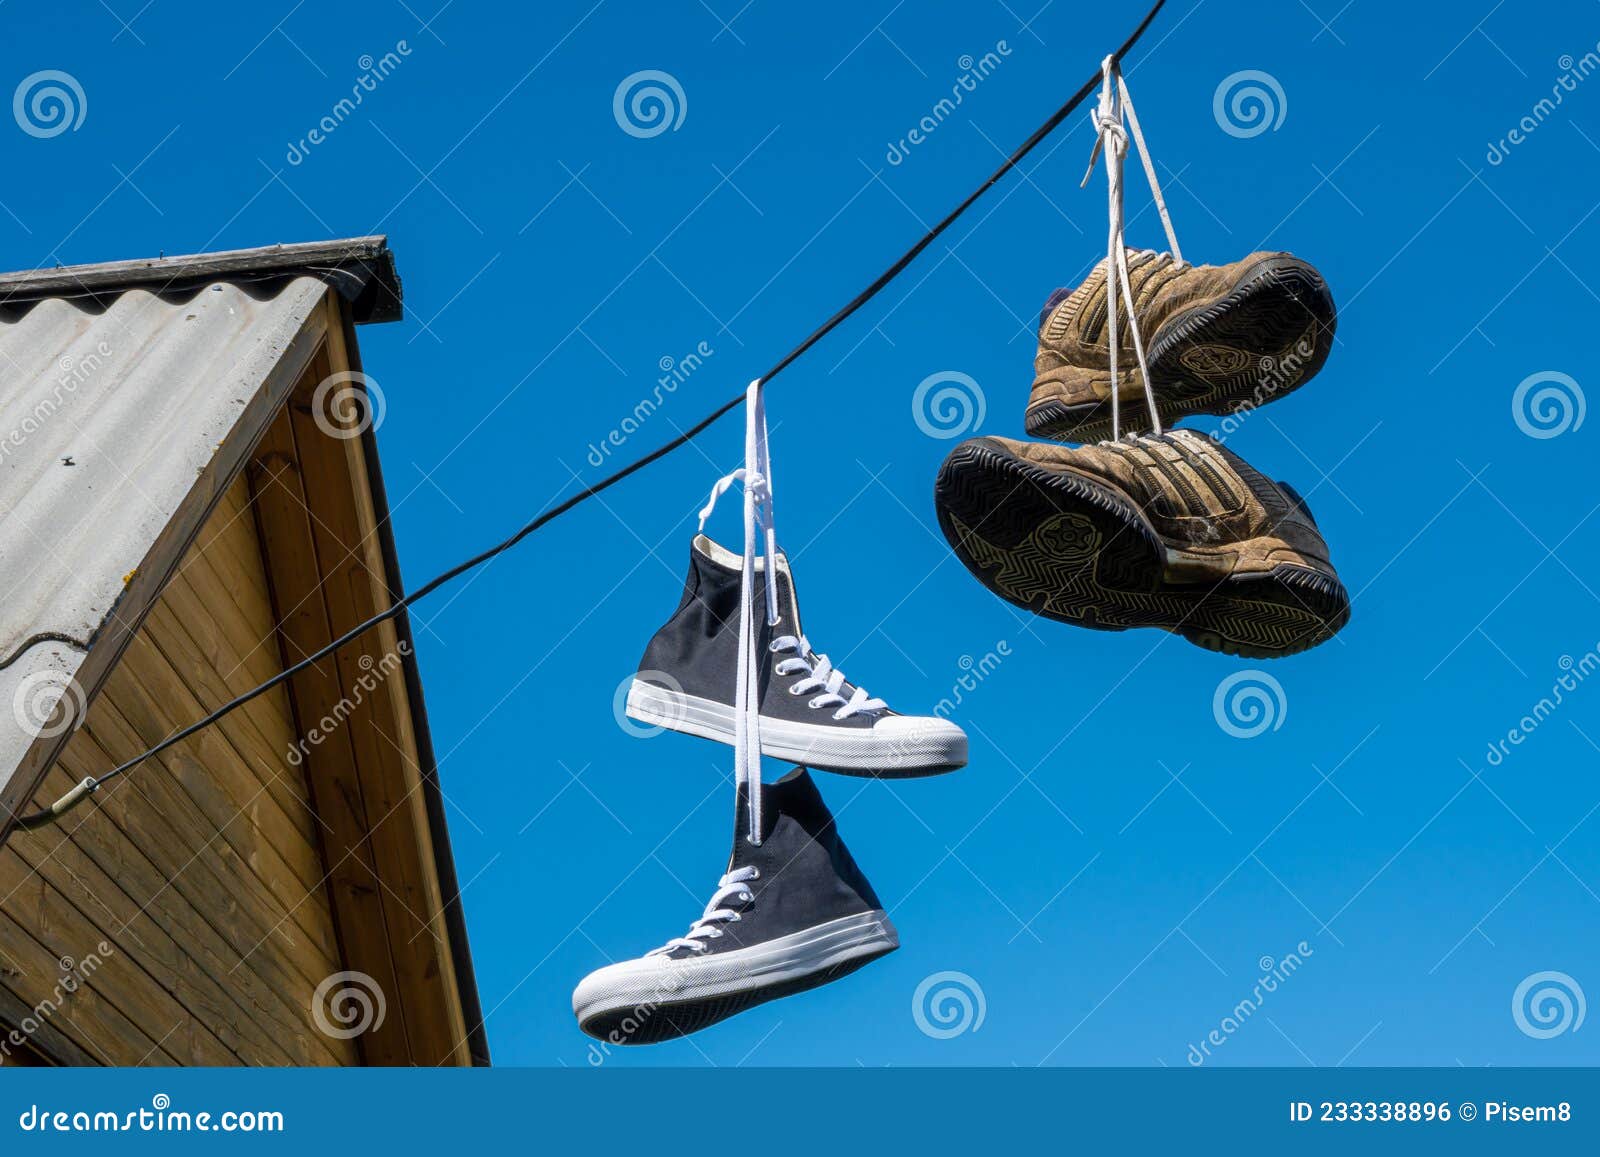 Sneakers Hanging on Electric Wires Editorial Photo - Image of assorted ...